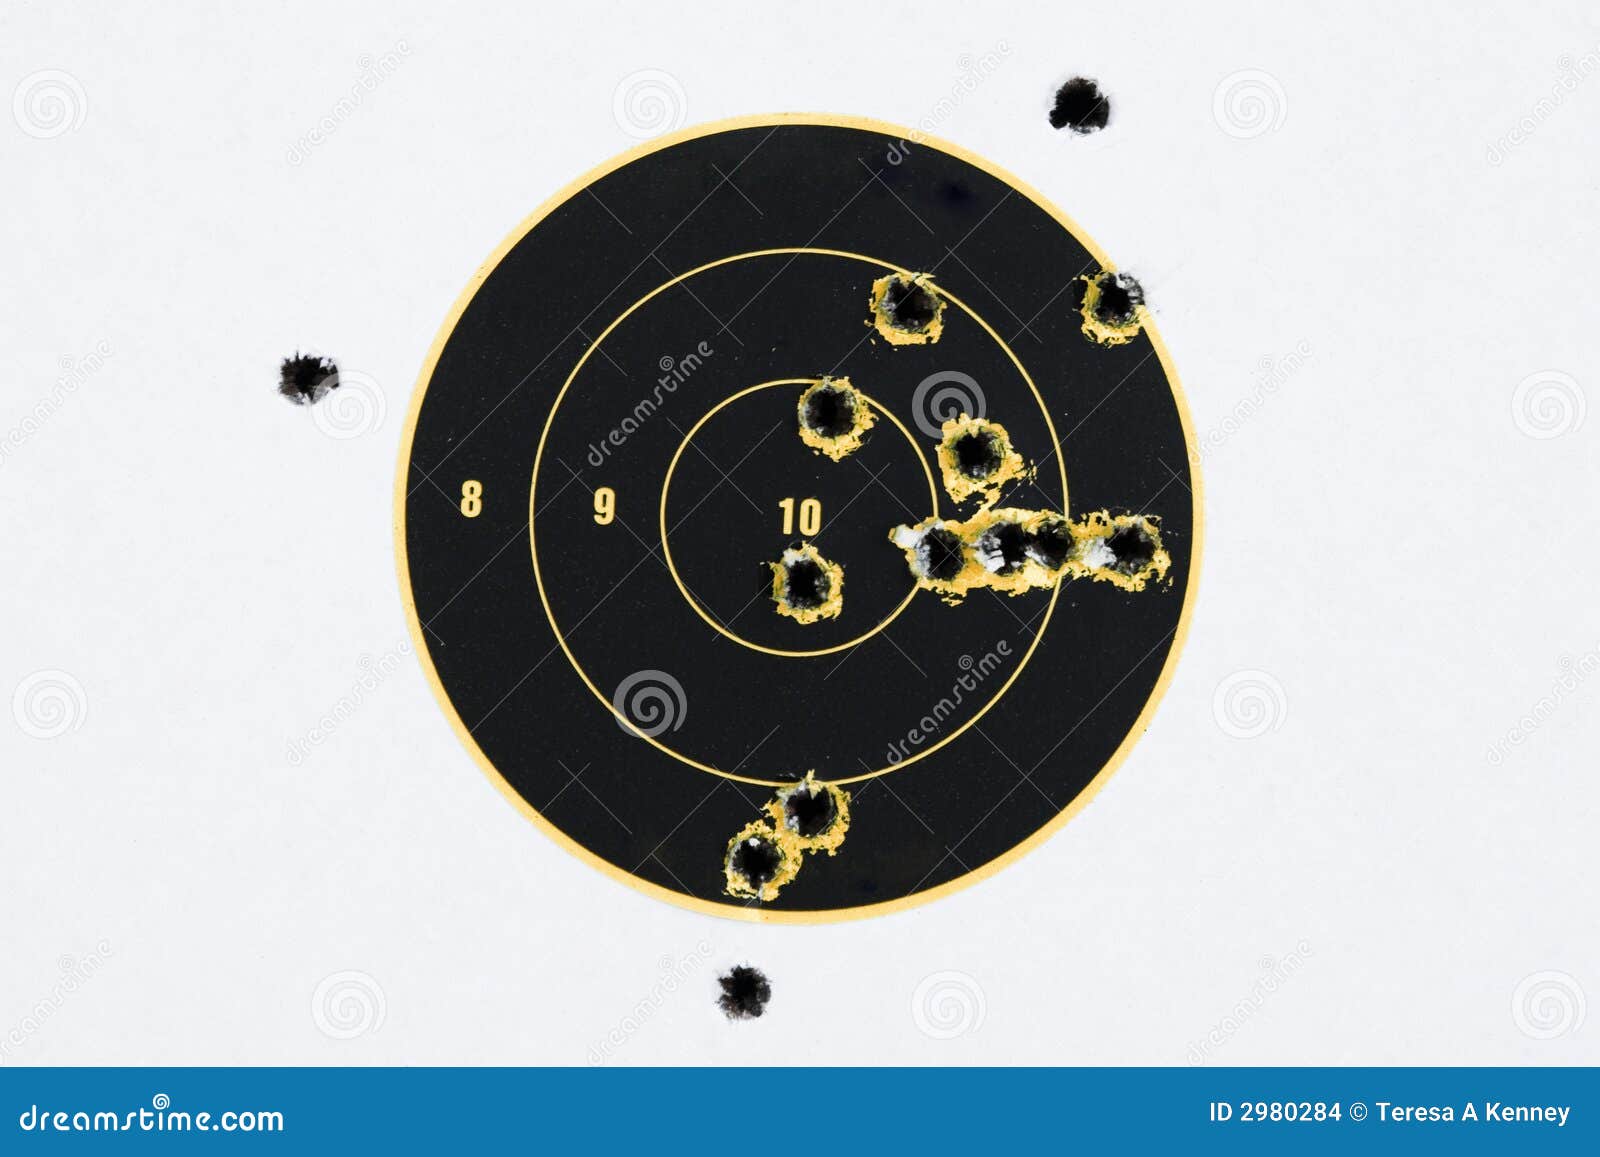 target with bullet holes